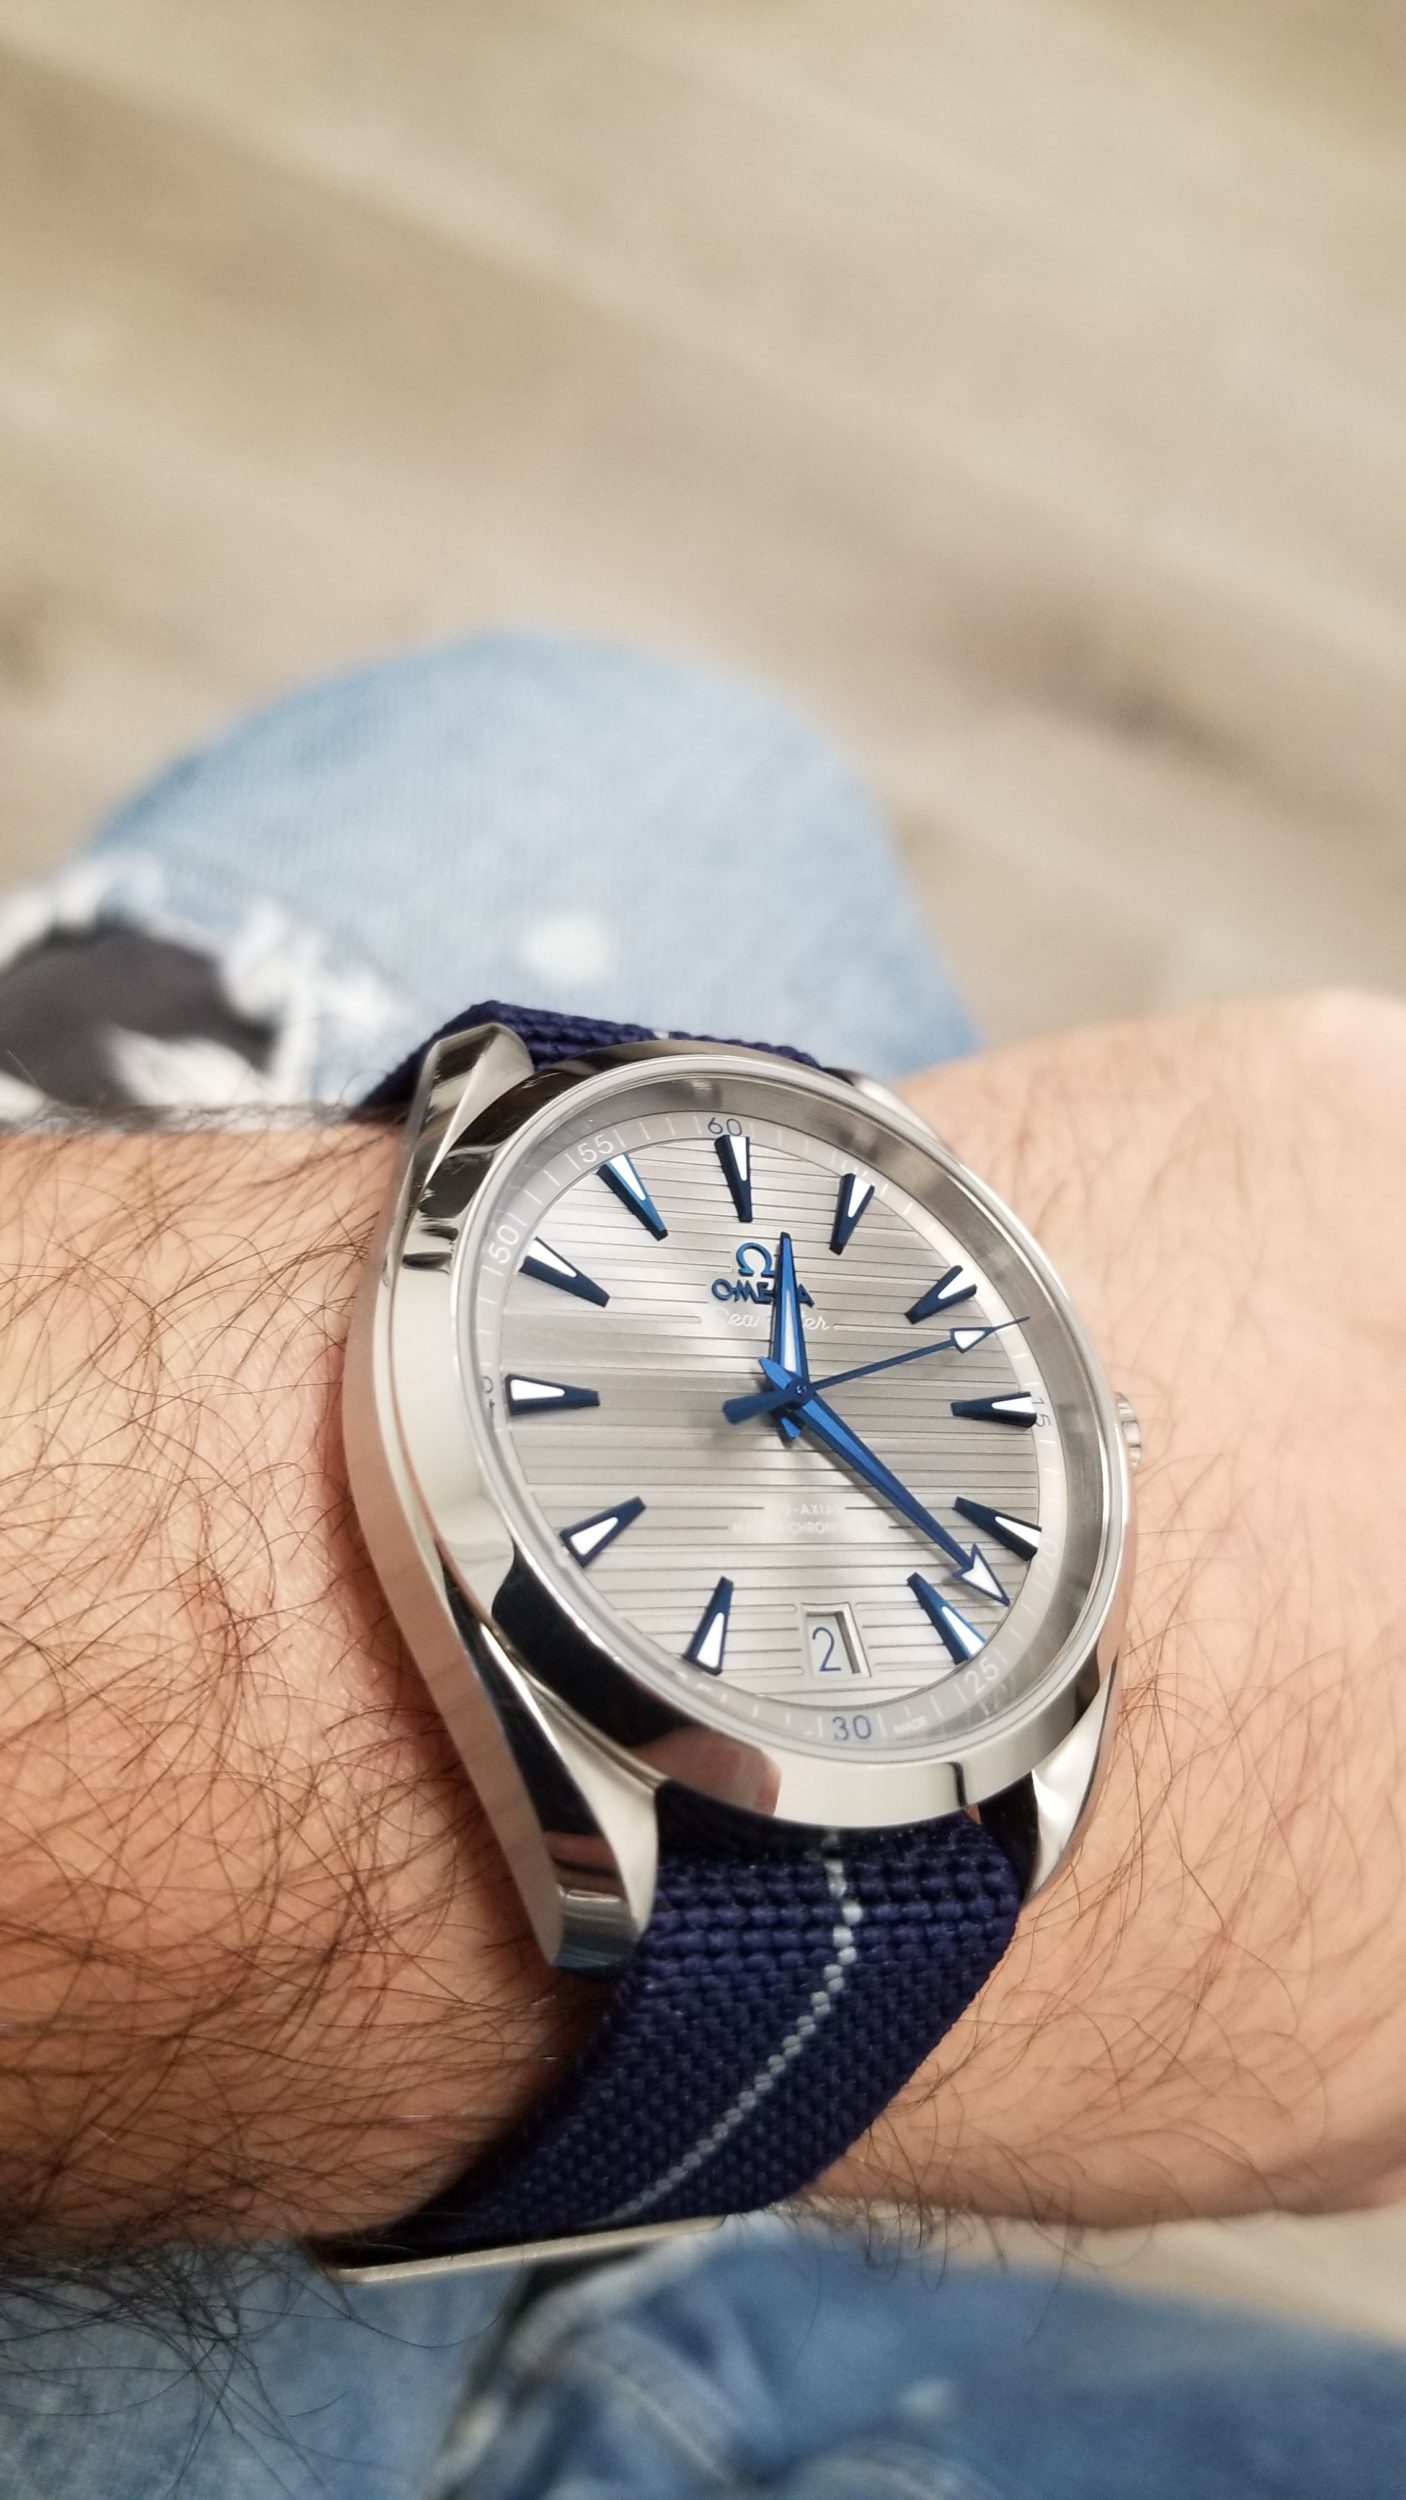 Owner Review: Omega Seamaster Aqua Terra - almost perfect.